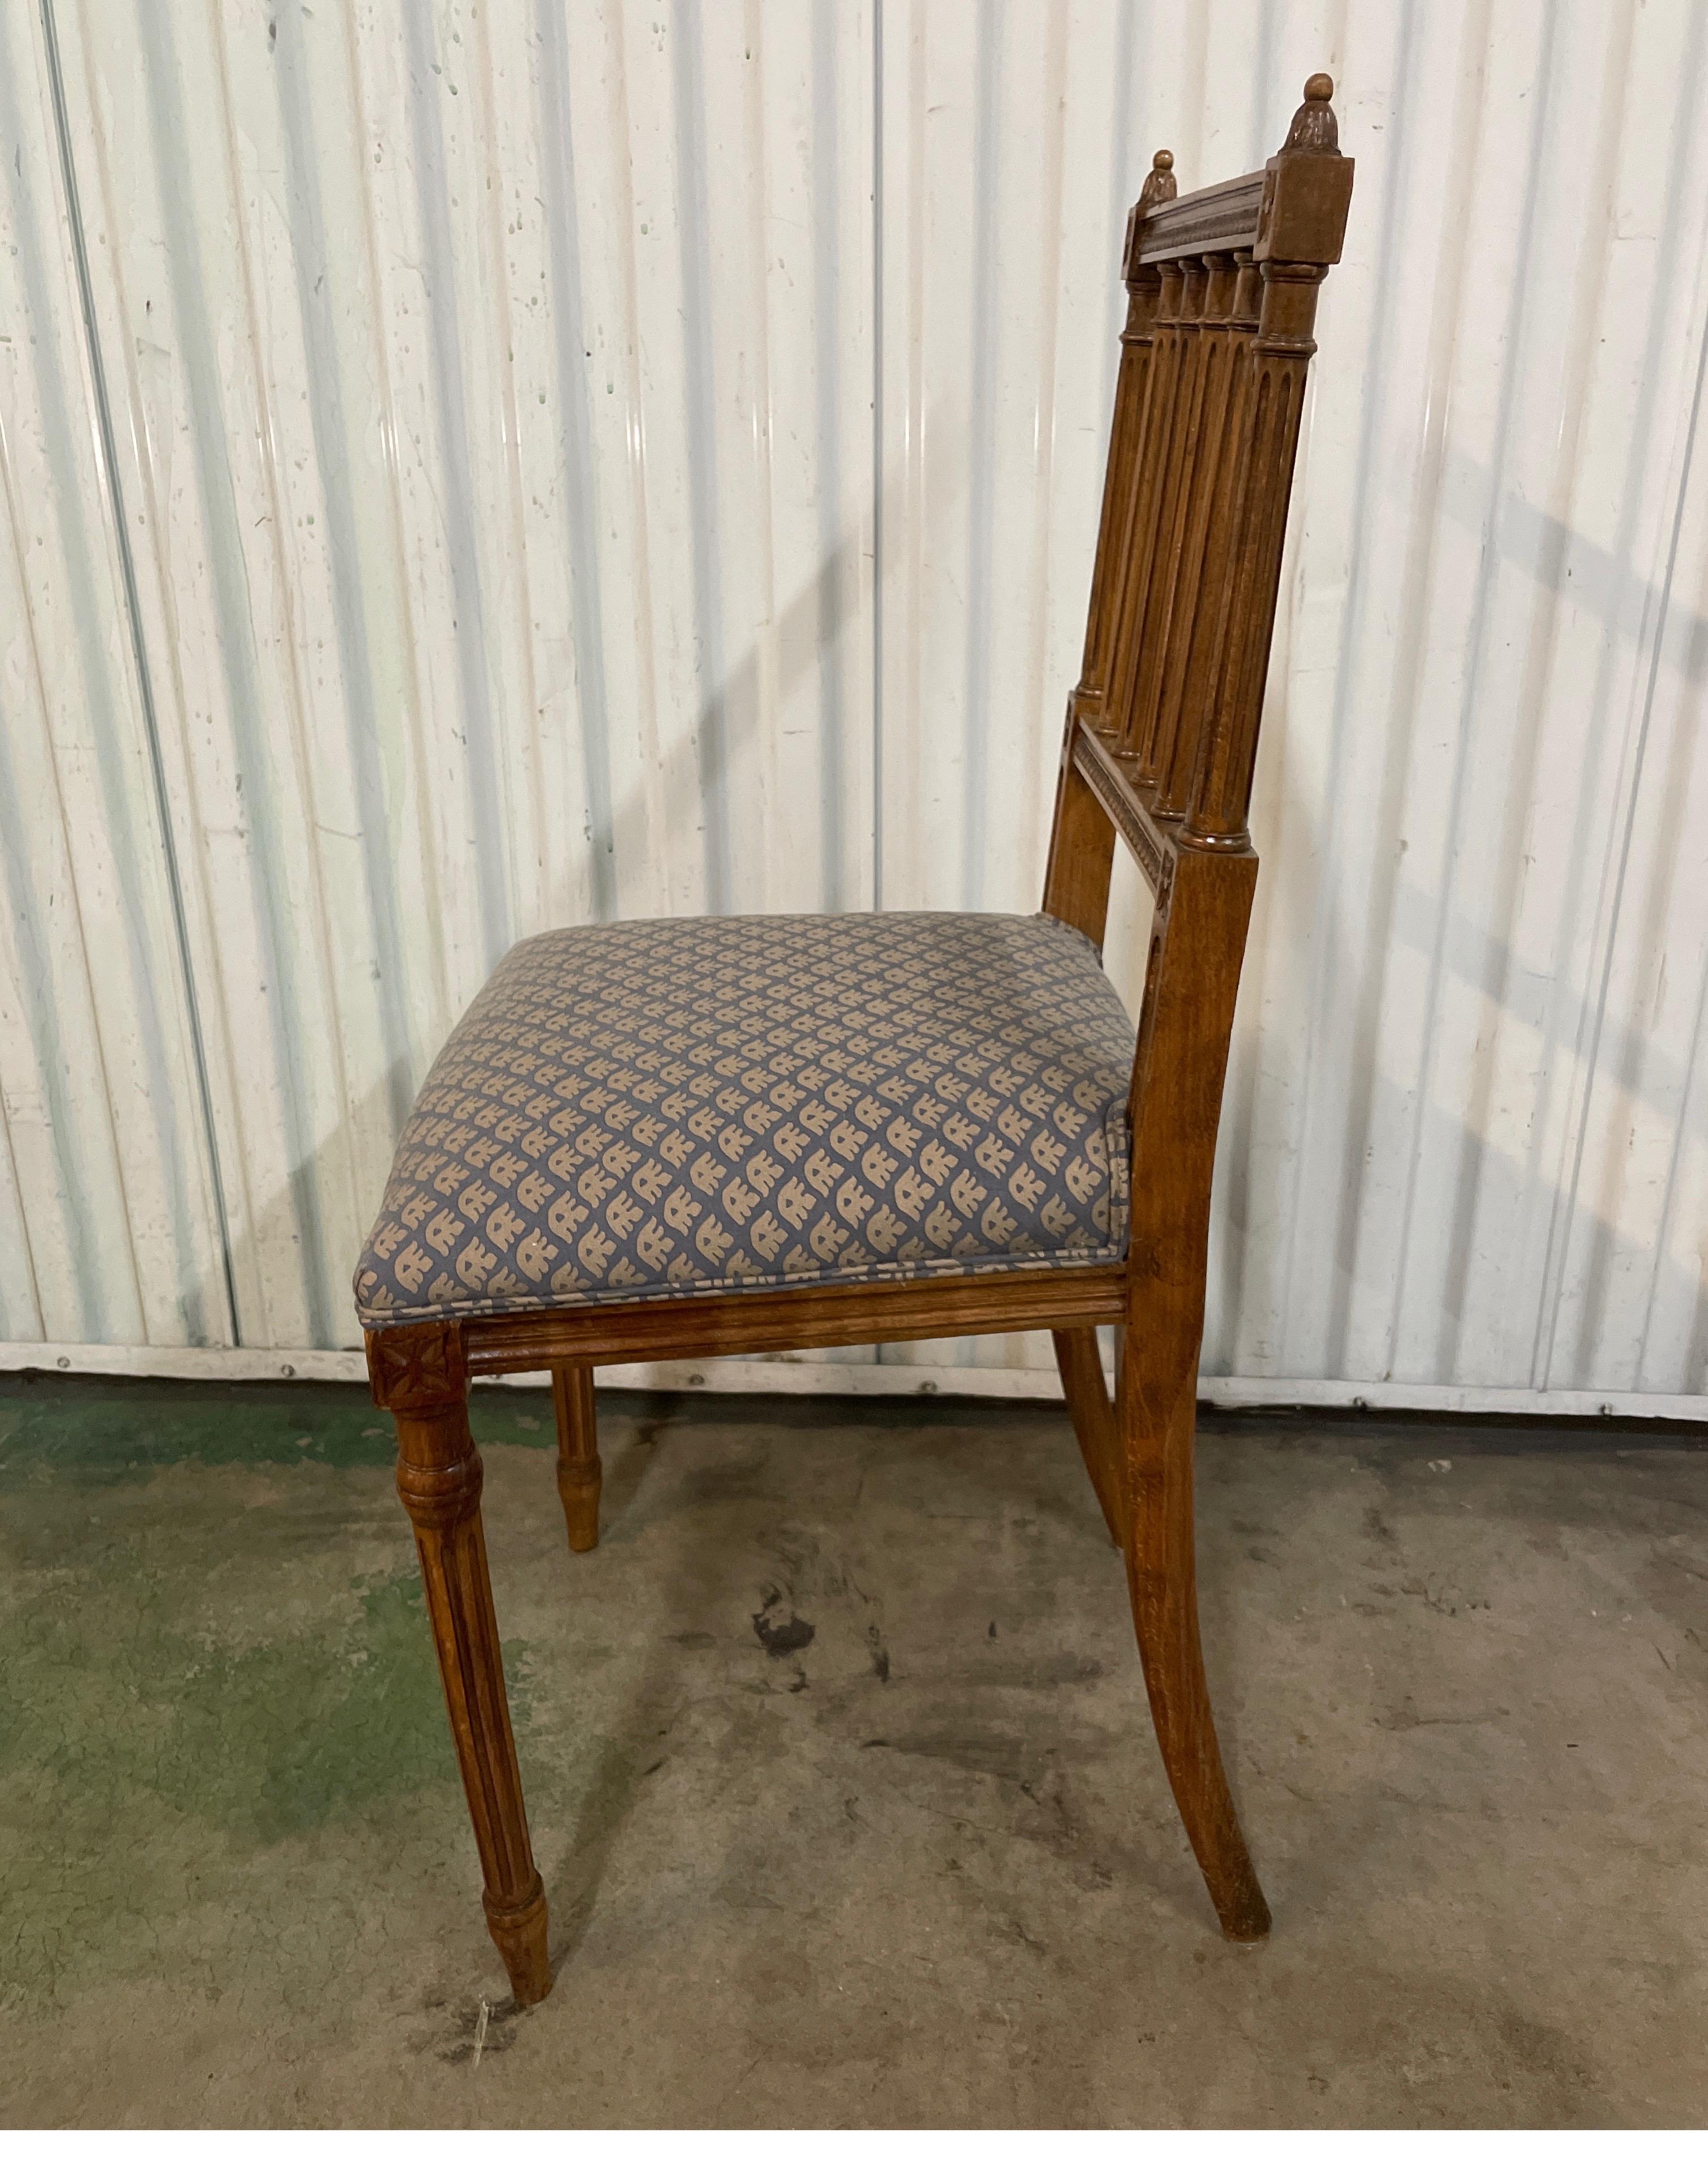 Italian Antique Louis XVI Style Chiavari Chair with Fortuny Upholstered Seat